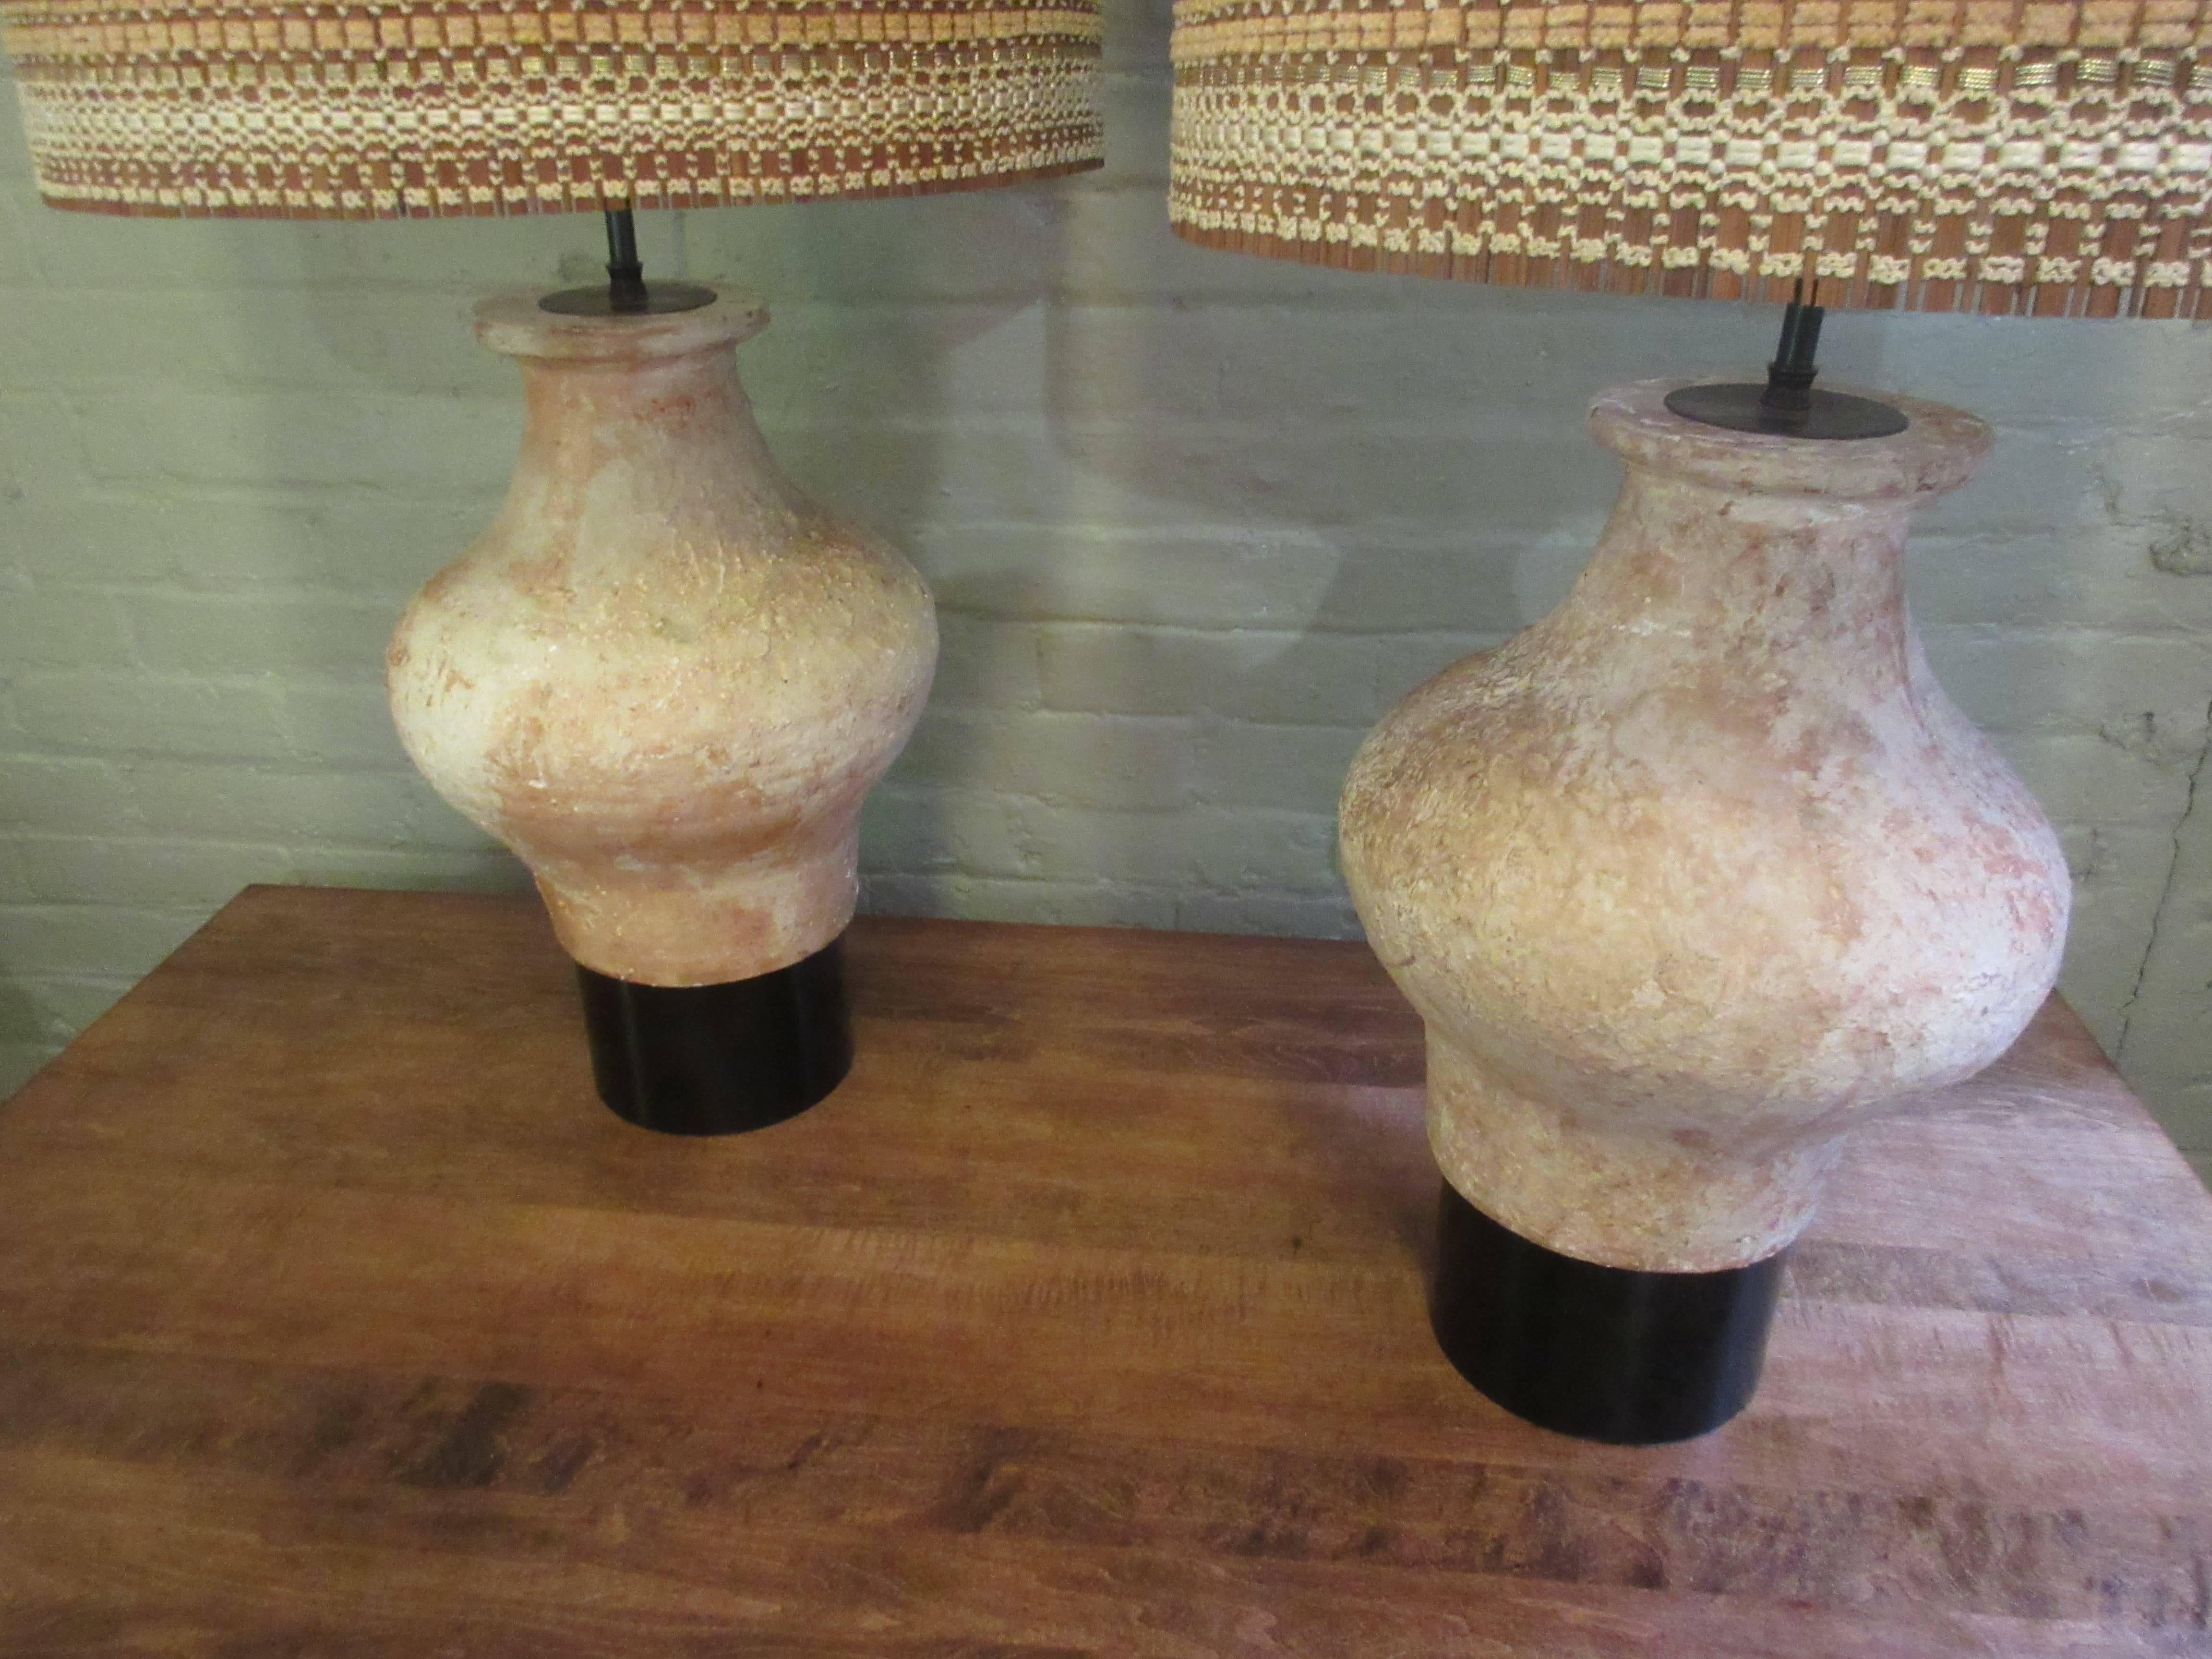 William Billy Haines Etuscan style ceramic lamps from the Estate of Dr. Herbert and Rita LeRoy Roedling of Beverly Hills California. Lamps are paired with beautiful near perfect Maria Kipp woven lampshades. Ceramic vessels sit on lacquered black